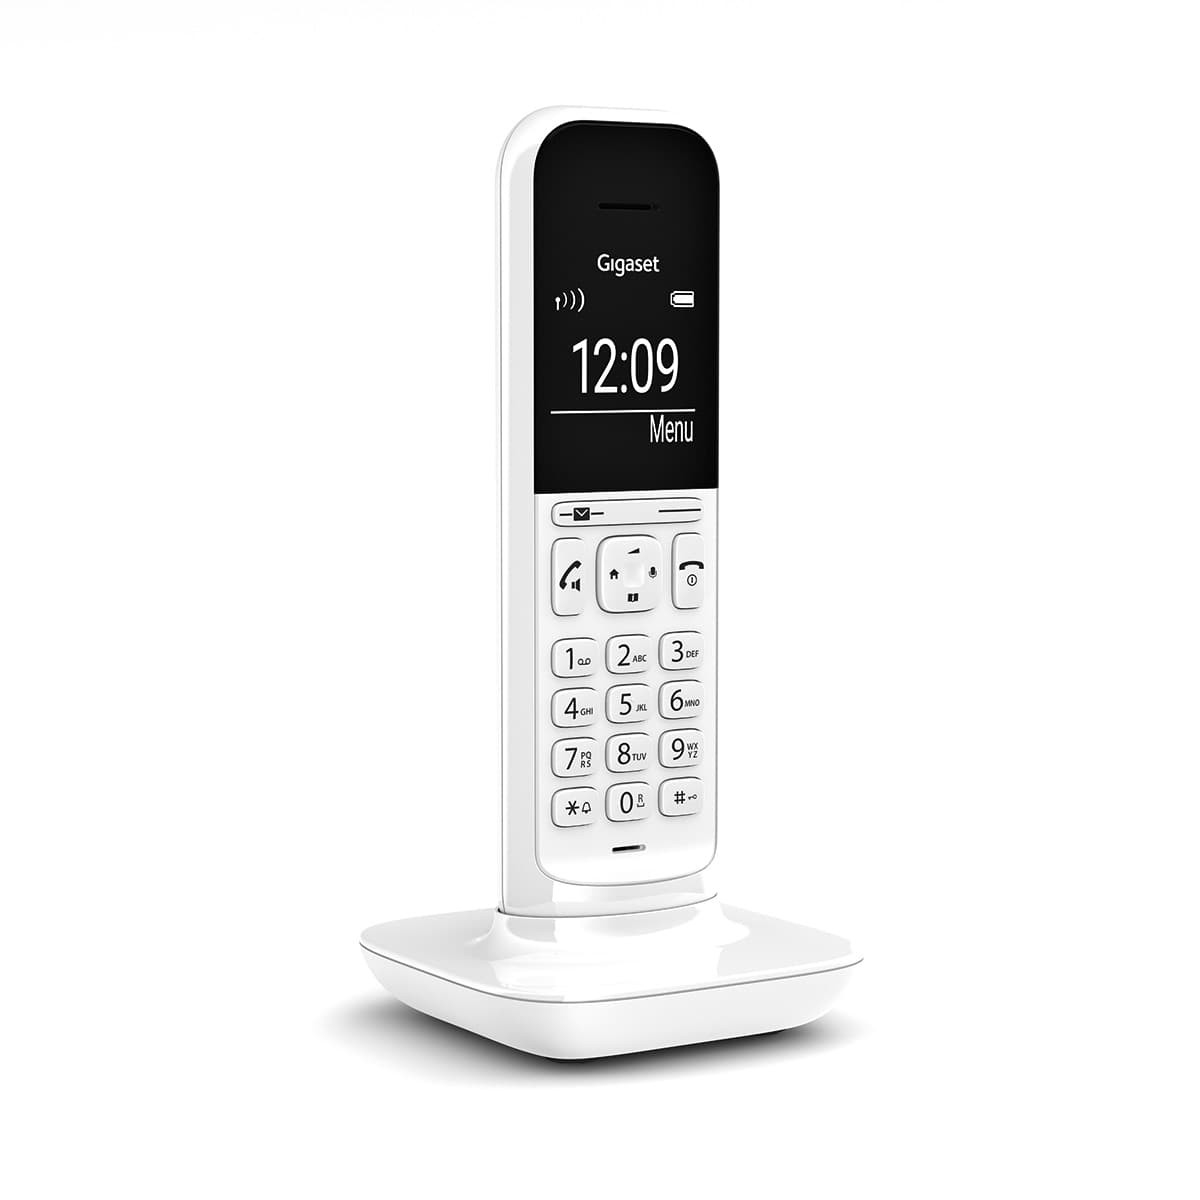 S30852-H2902-B102 UNIFY GIGASET OPENSTAGE CL390 - Analog/DECT telephone - Wireless handset - Speakerphone - 150 entries - White